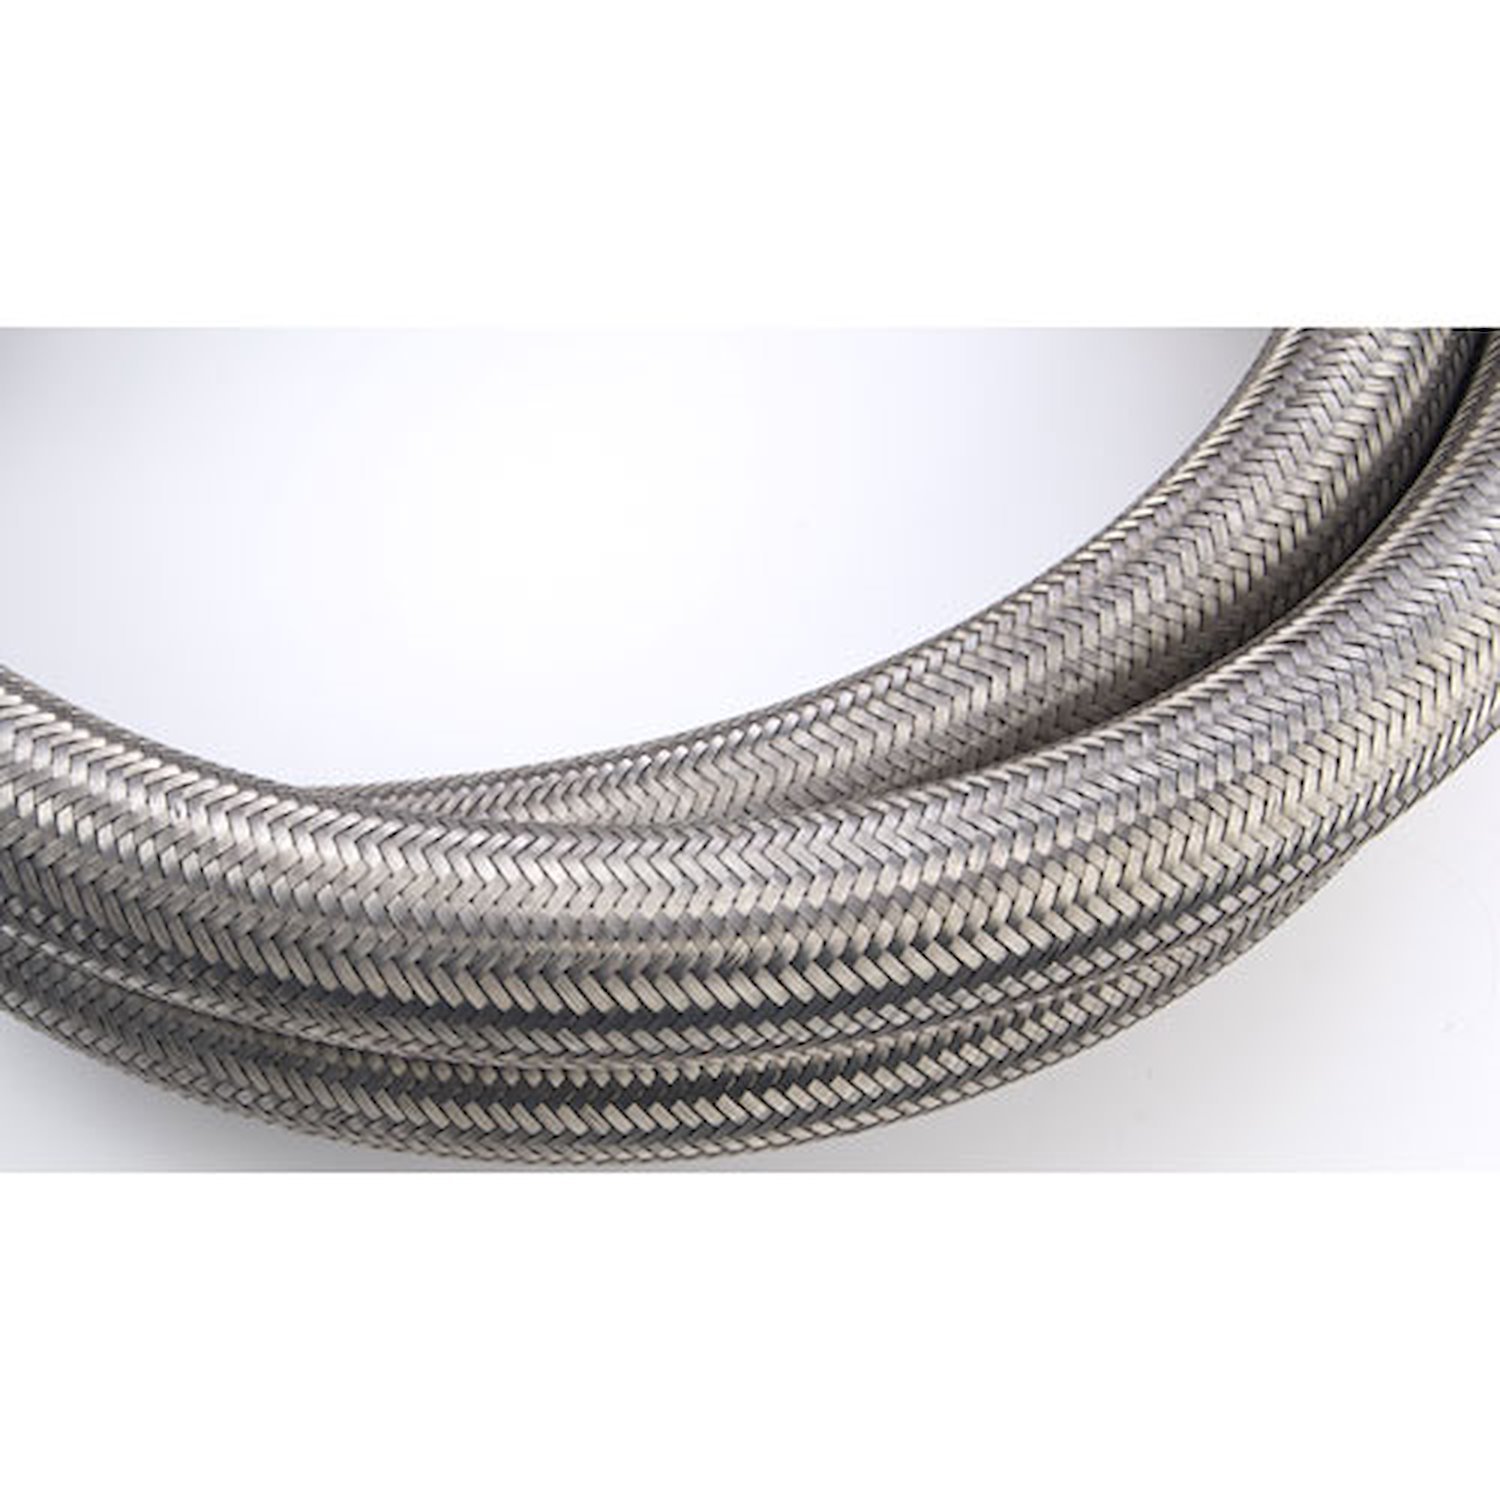 Pro-Flo 200 Series Stainless Steel Braided Hose -20